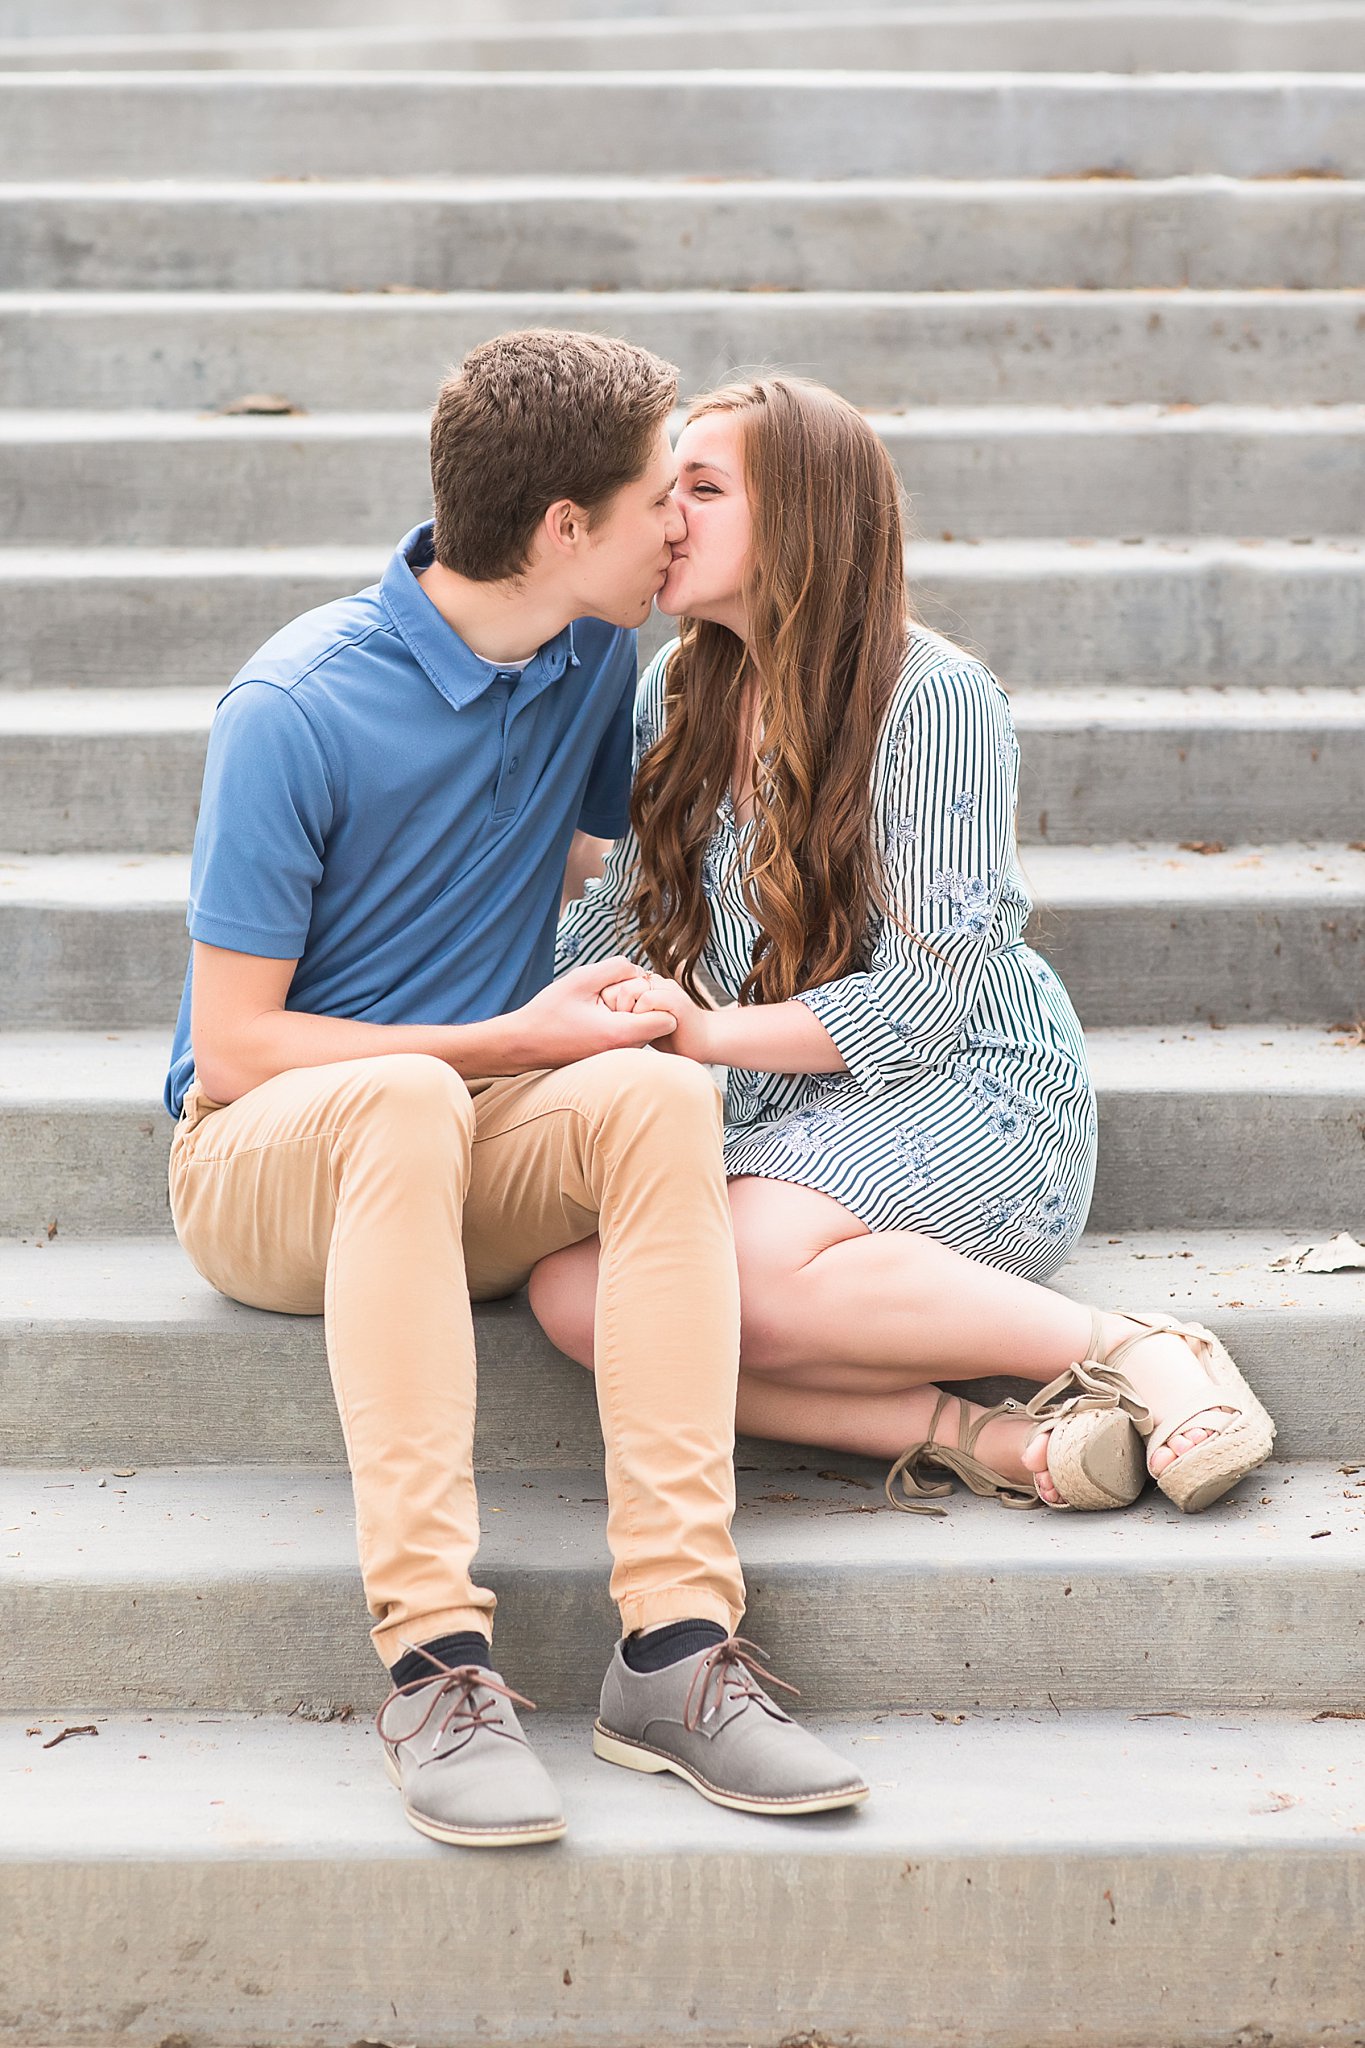 Promenade Park Engagement session photos by Simply Seeking Photography